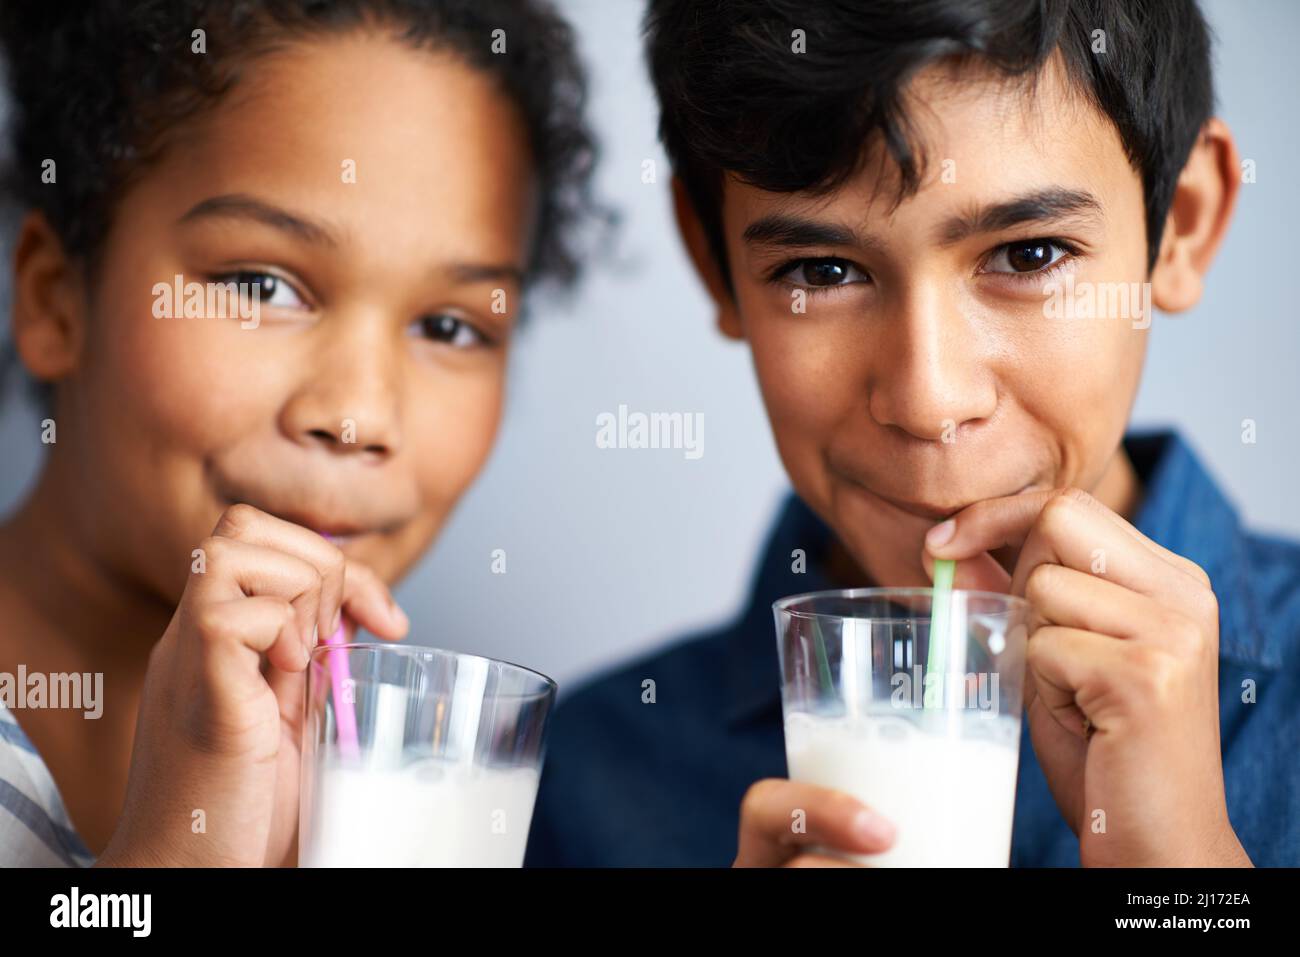 Calcium for healthy bones. A brother and sister drinking milk together. Stock Photo